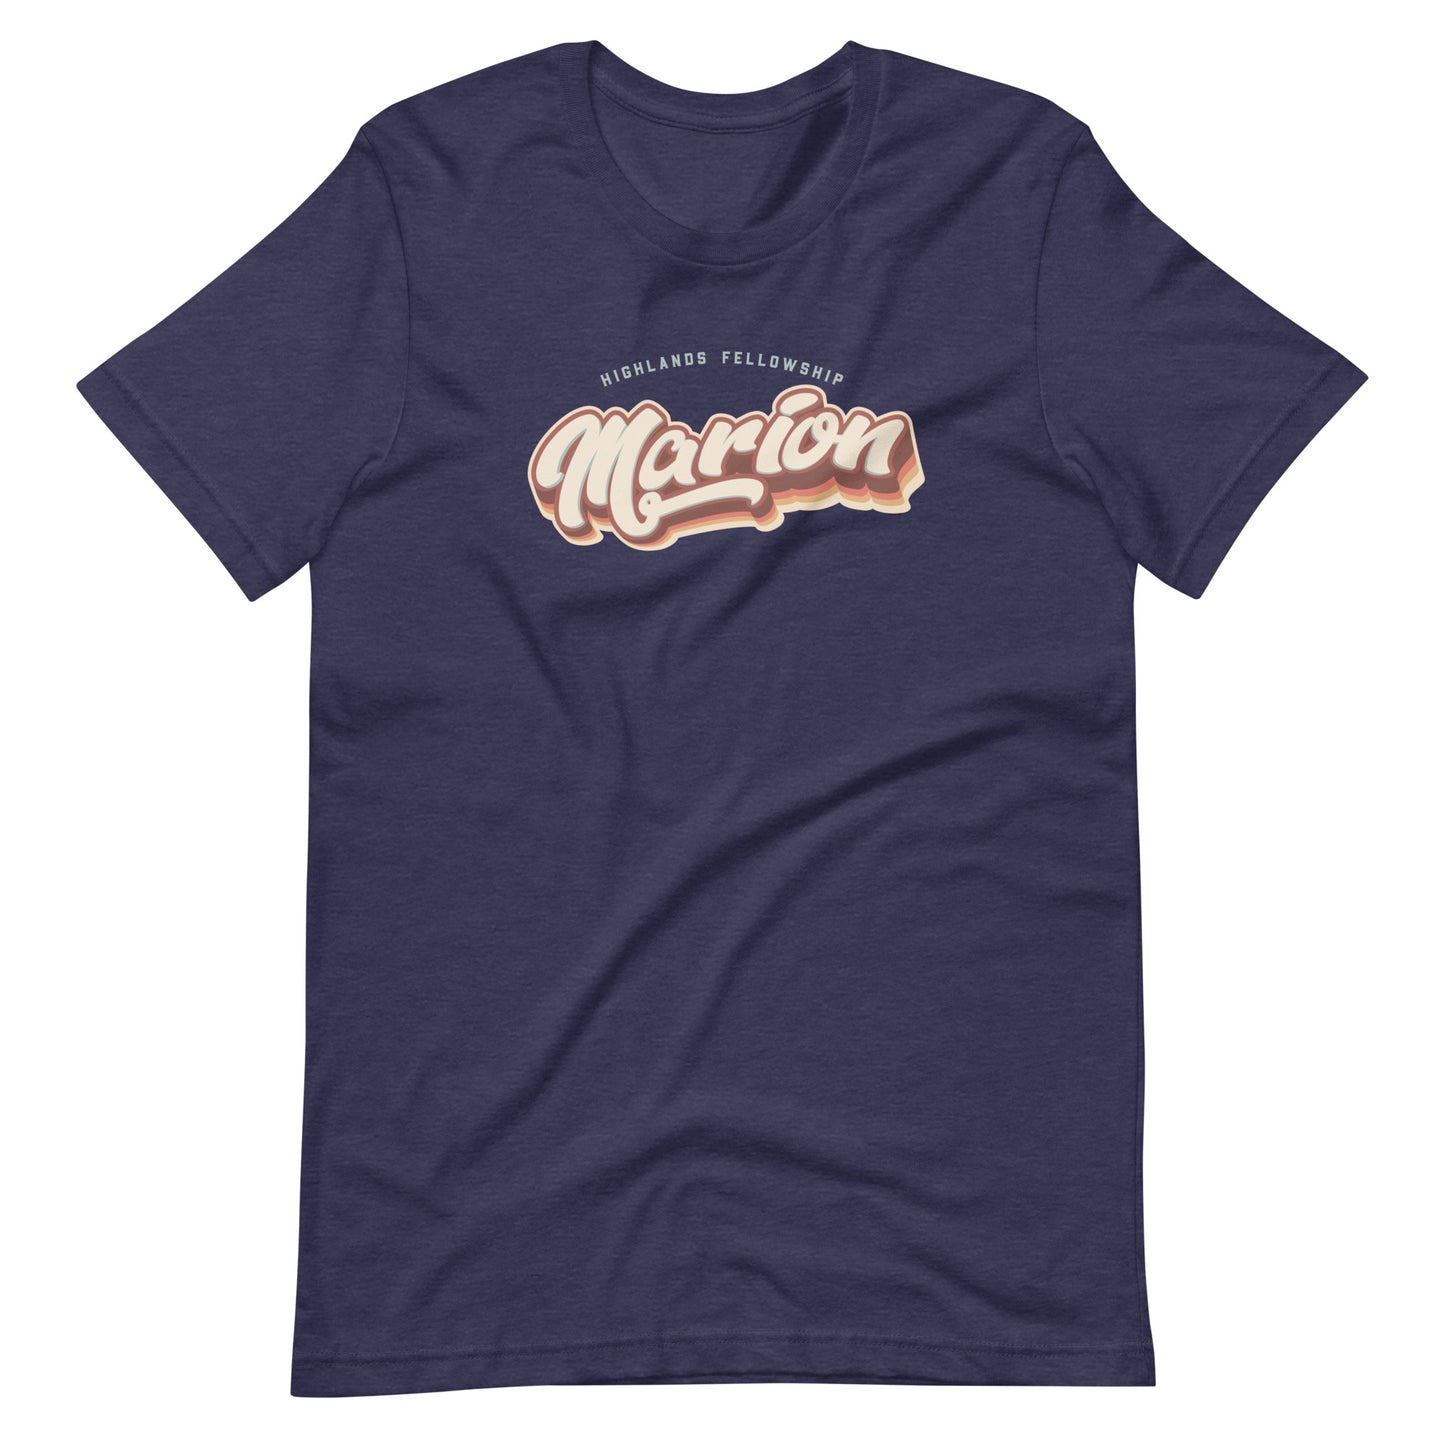 Marion "City on a Hill" T-Shirt